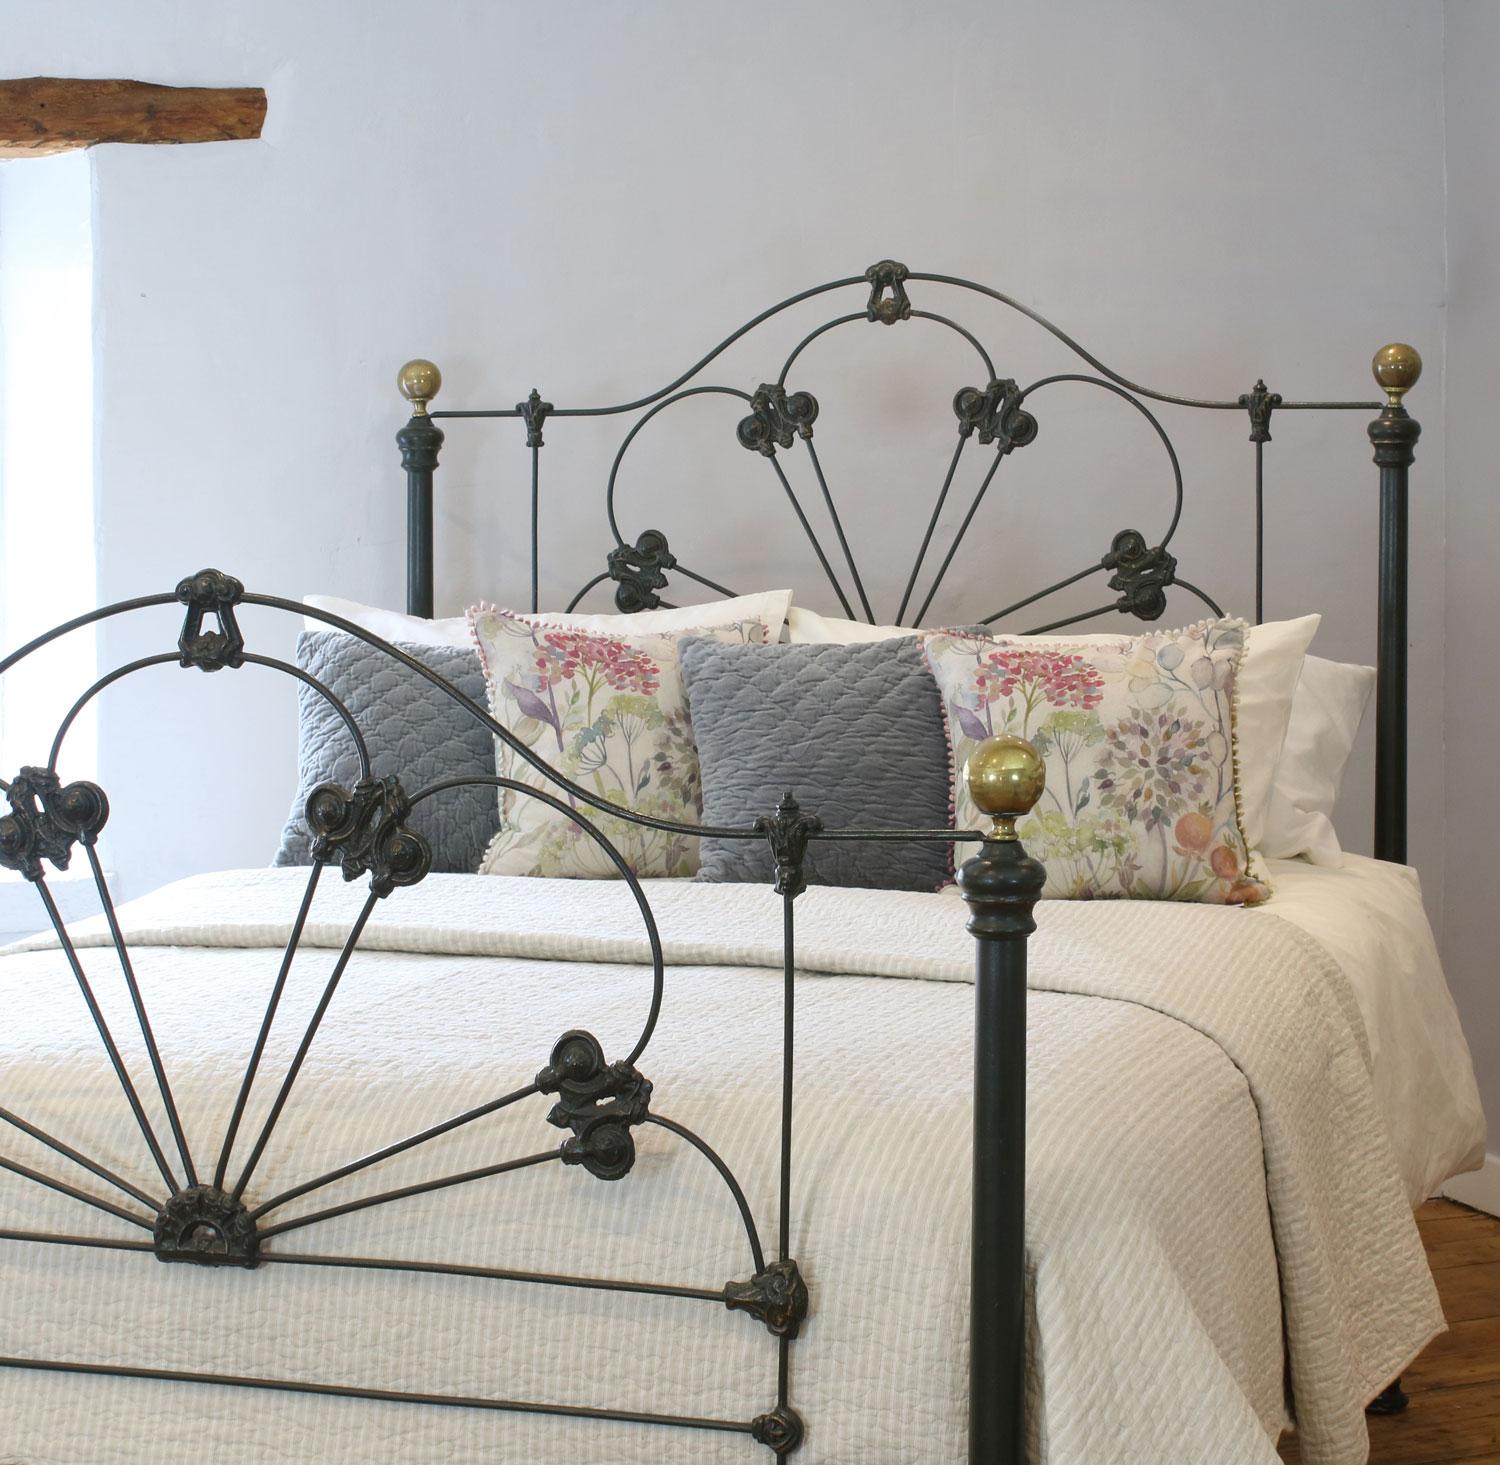 A mid-Victorian cast iron bedstead, finished in dark green with gold highlights on the castings. This bed has a hoops design with decorative castings on the head and foot boards. The bed can repainted in any color of your choice, if desired.